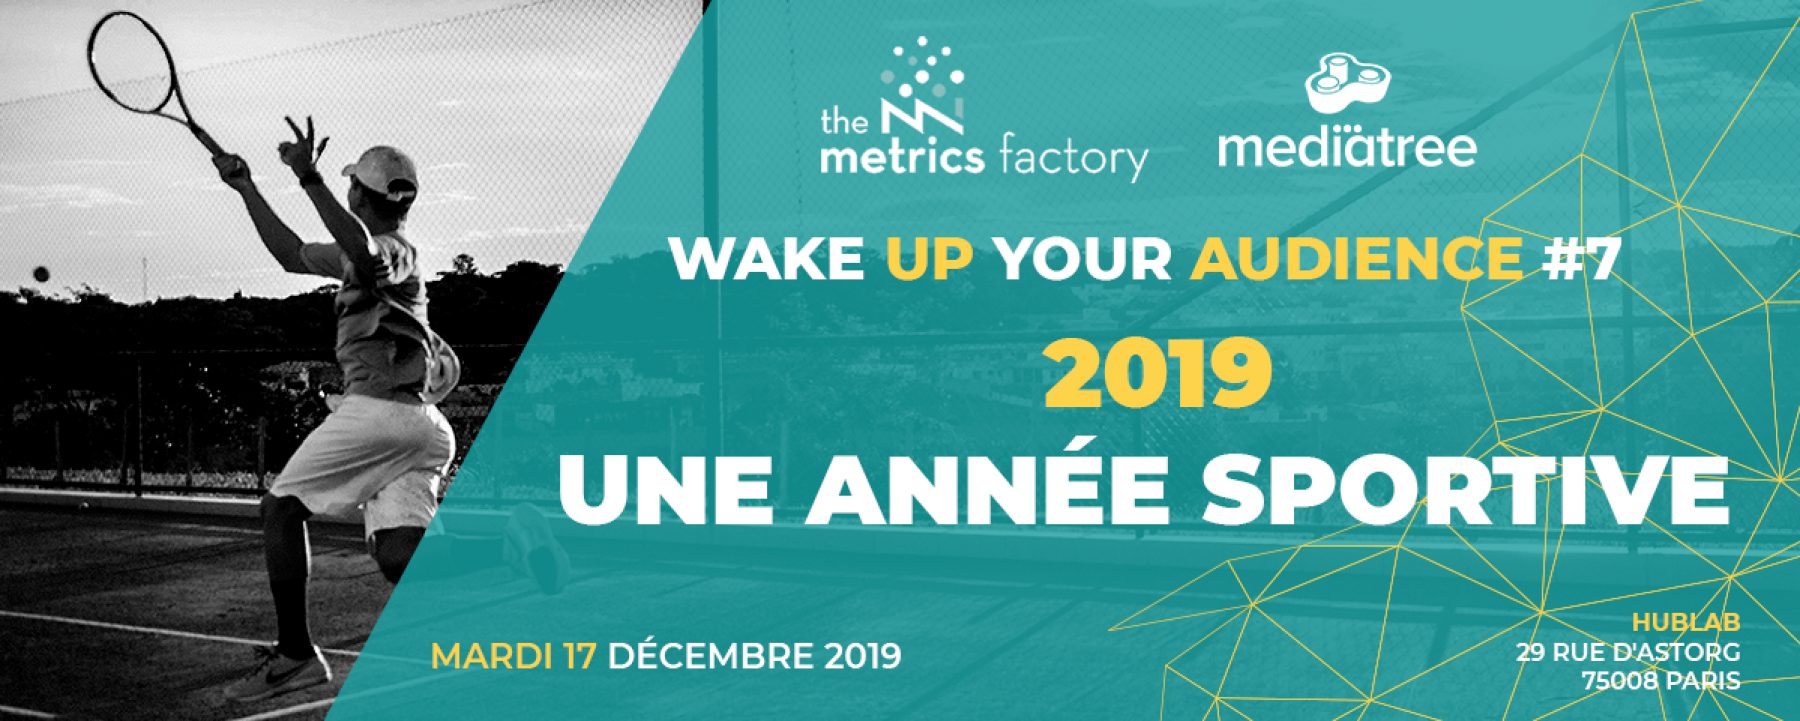 Visuel Wake Up Your Audience #7 - 2019, Une Année Sportive.